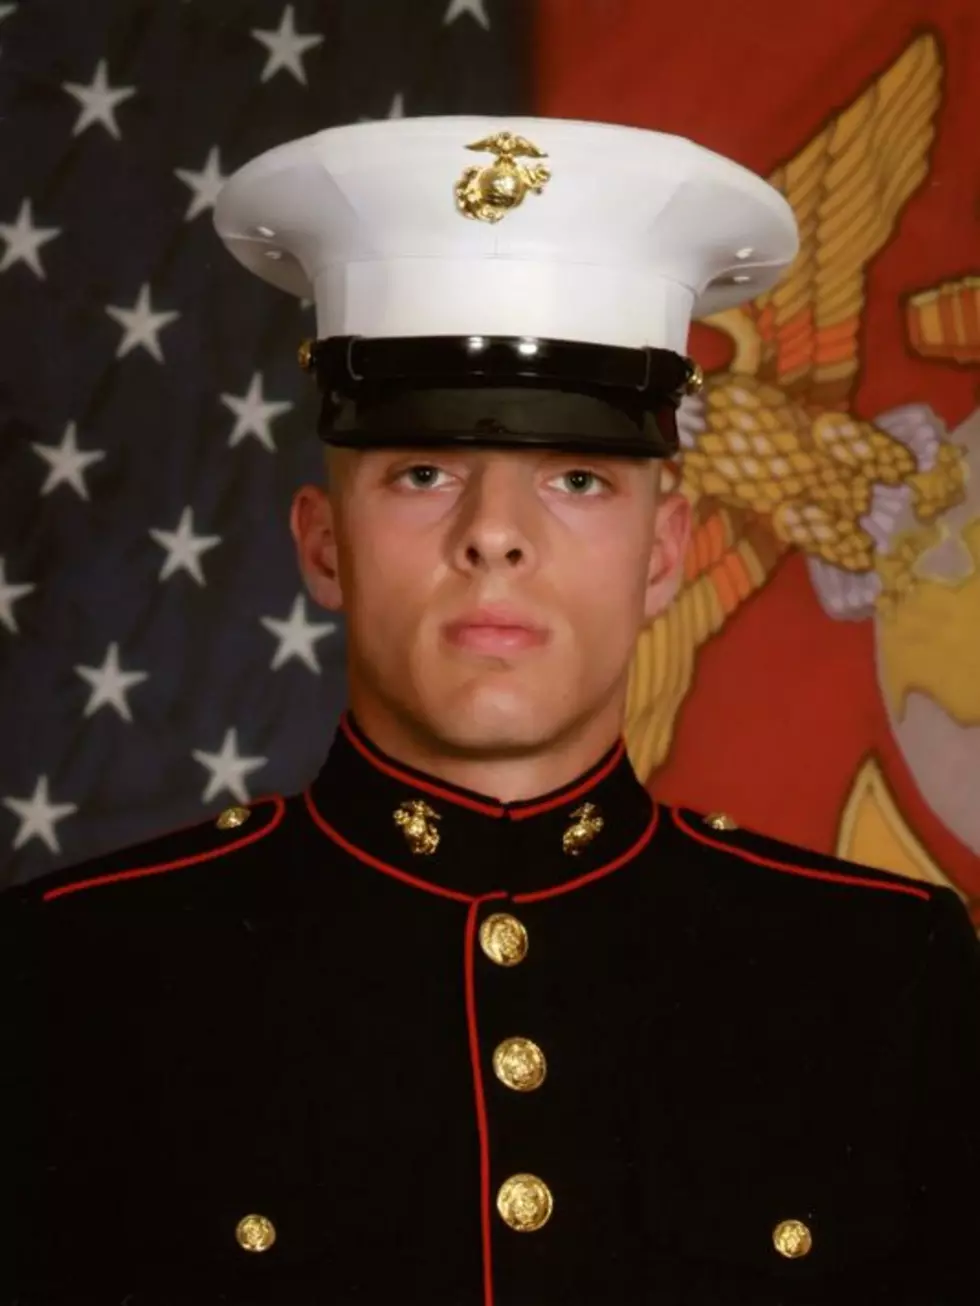 Search Continues for Minnesota Native and Other Missing Marines